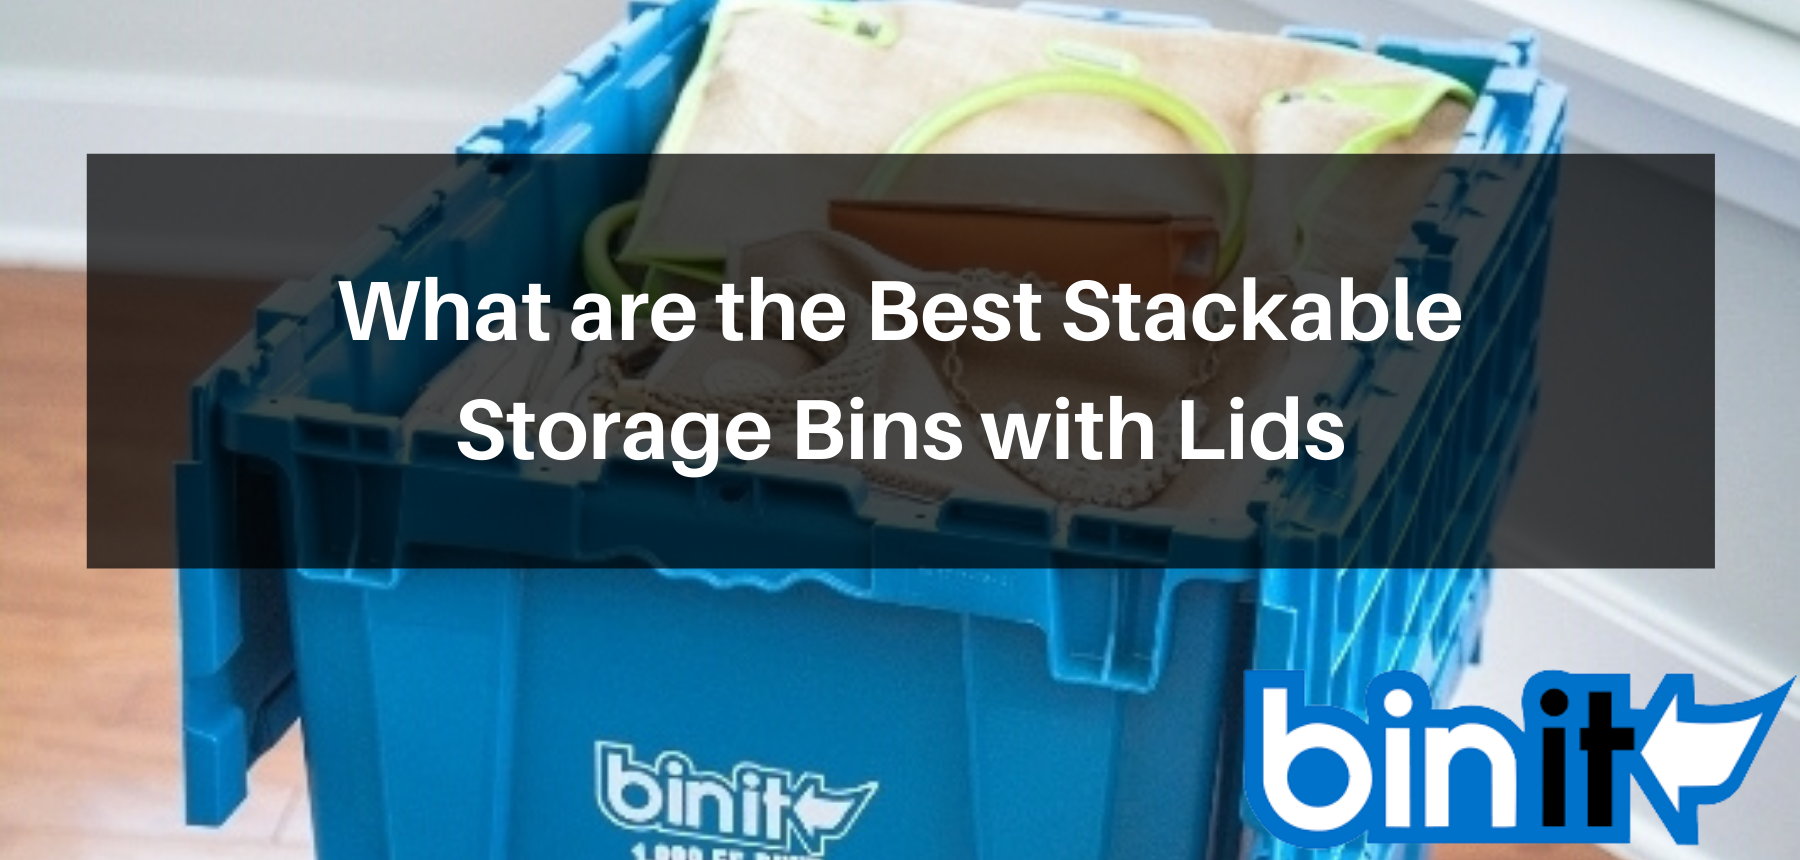 https://bin-it.com/wp-content/uploads/2021/03/What-are-the-Best-Stackable-Storage-Bins-with-Lids.png